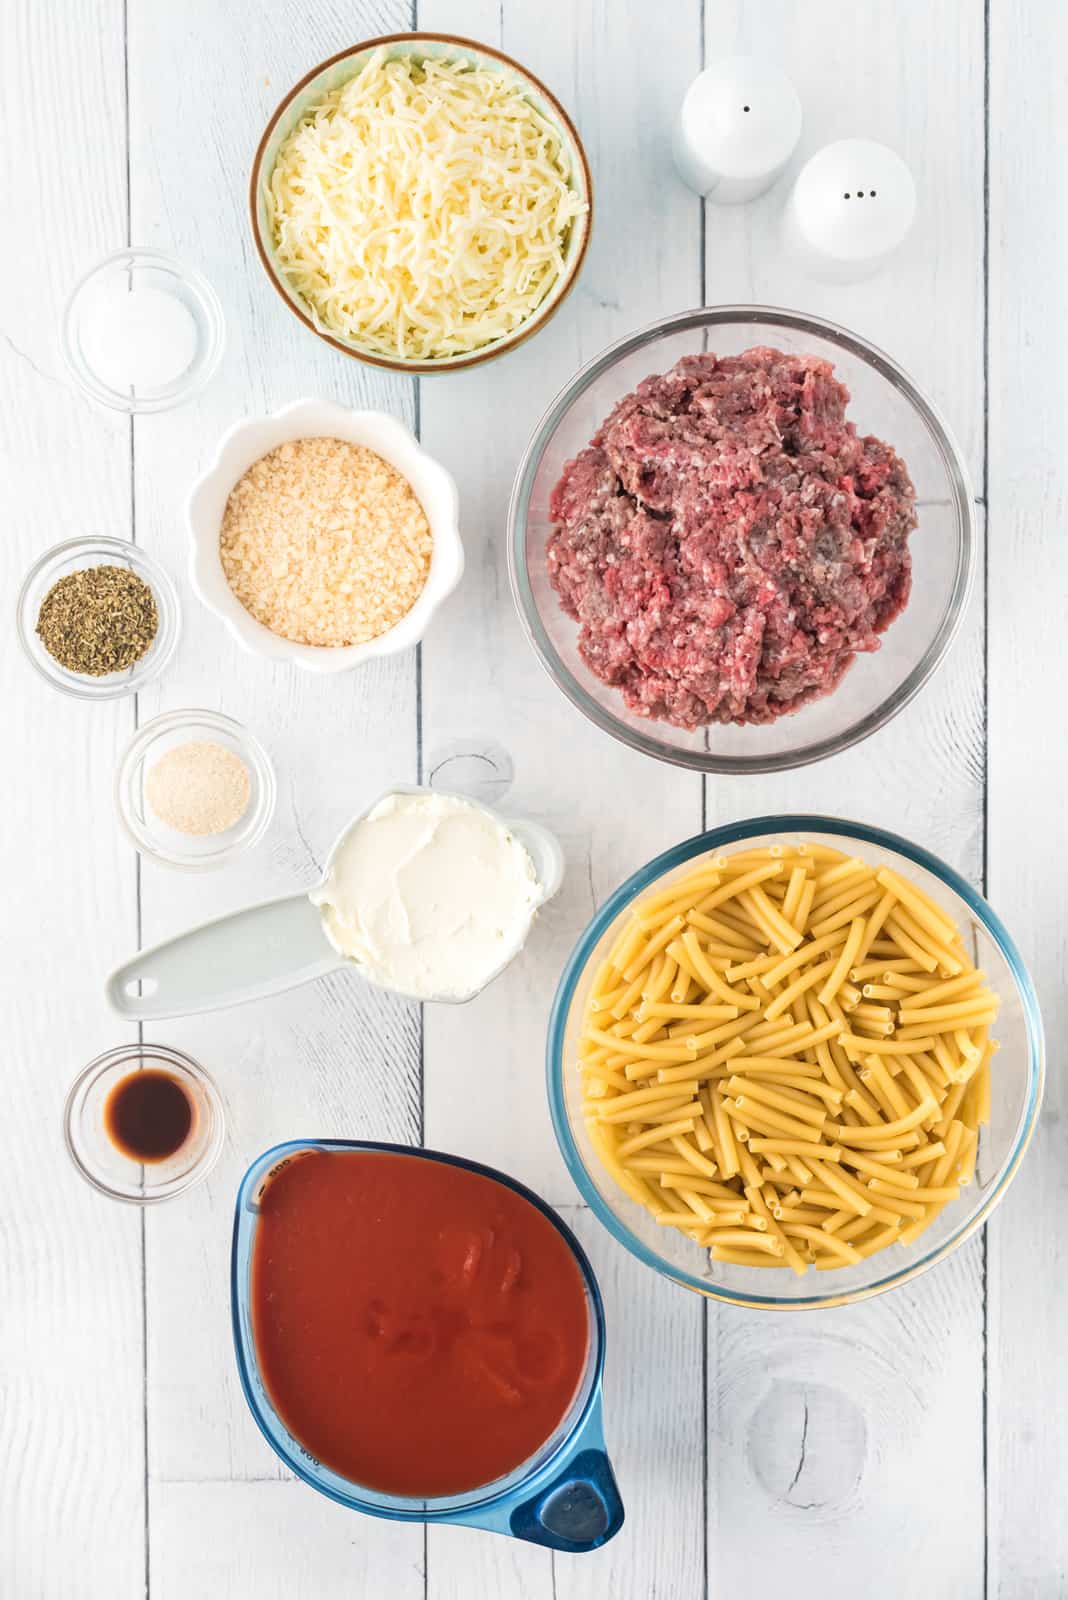 Ingredients needed to make a Baked Ziti Recipe